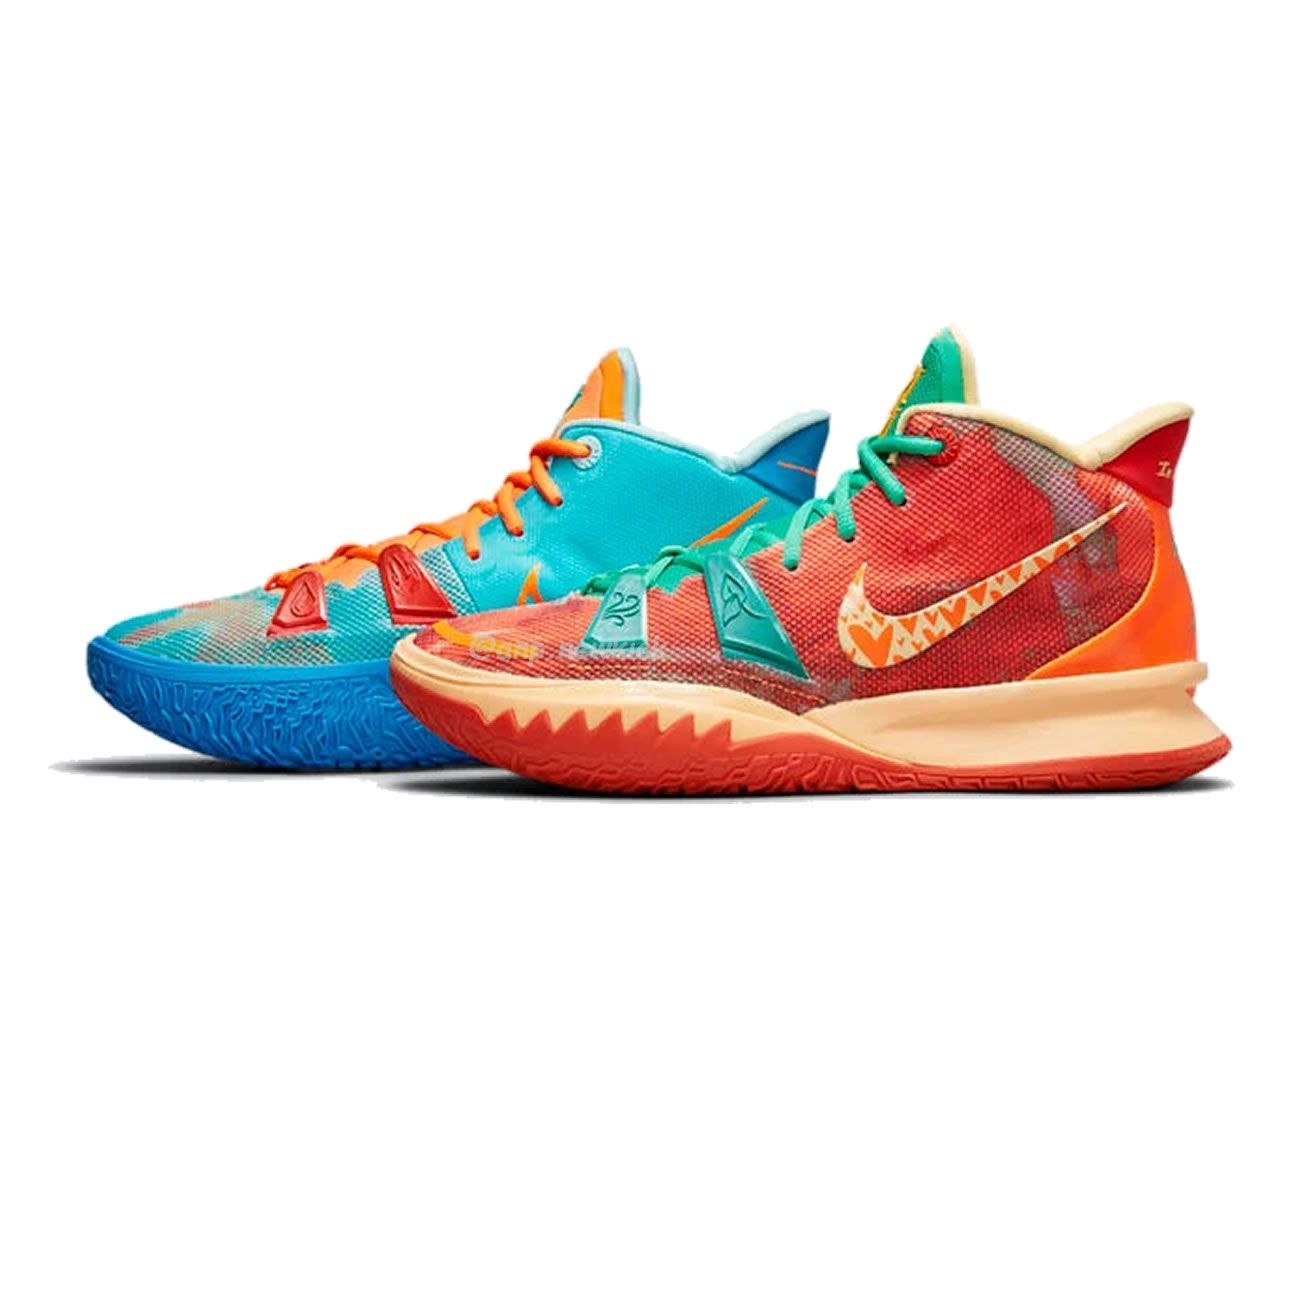 Nike Kyrie 7 Sneaker Room Fire And Water Do5360 900 (13) - newkick.org